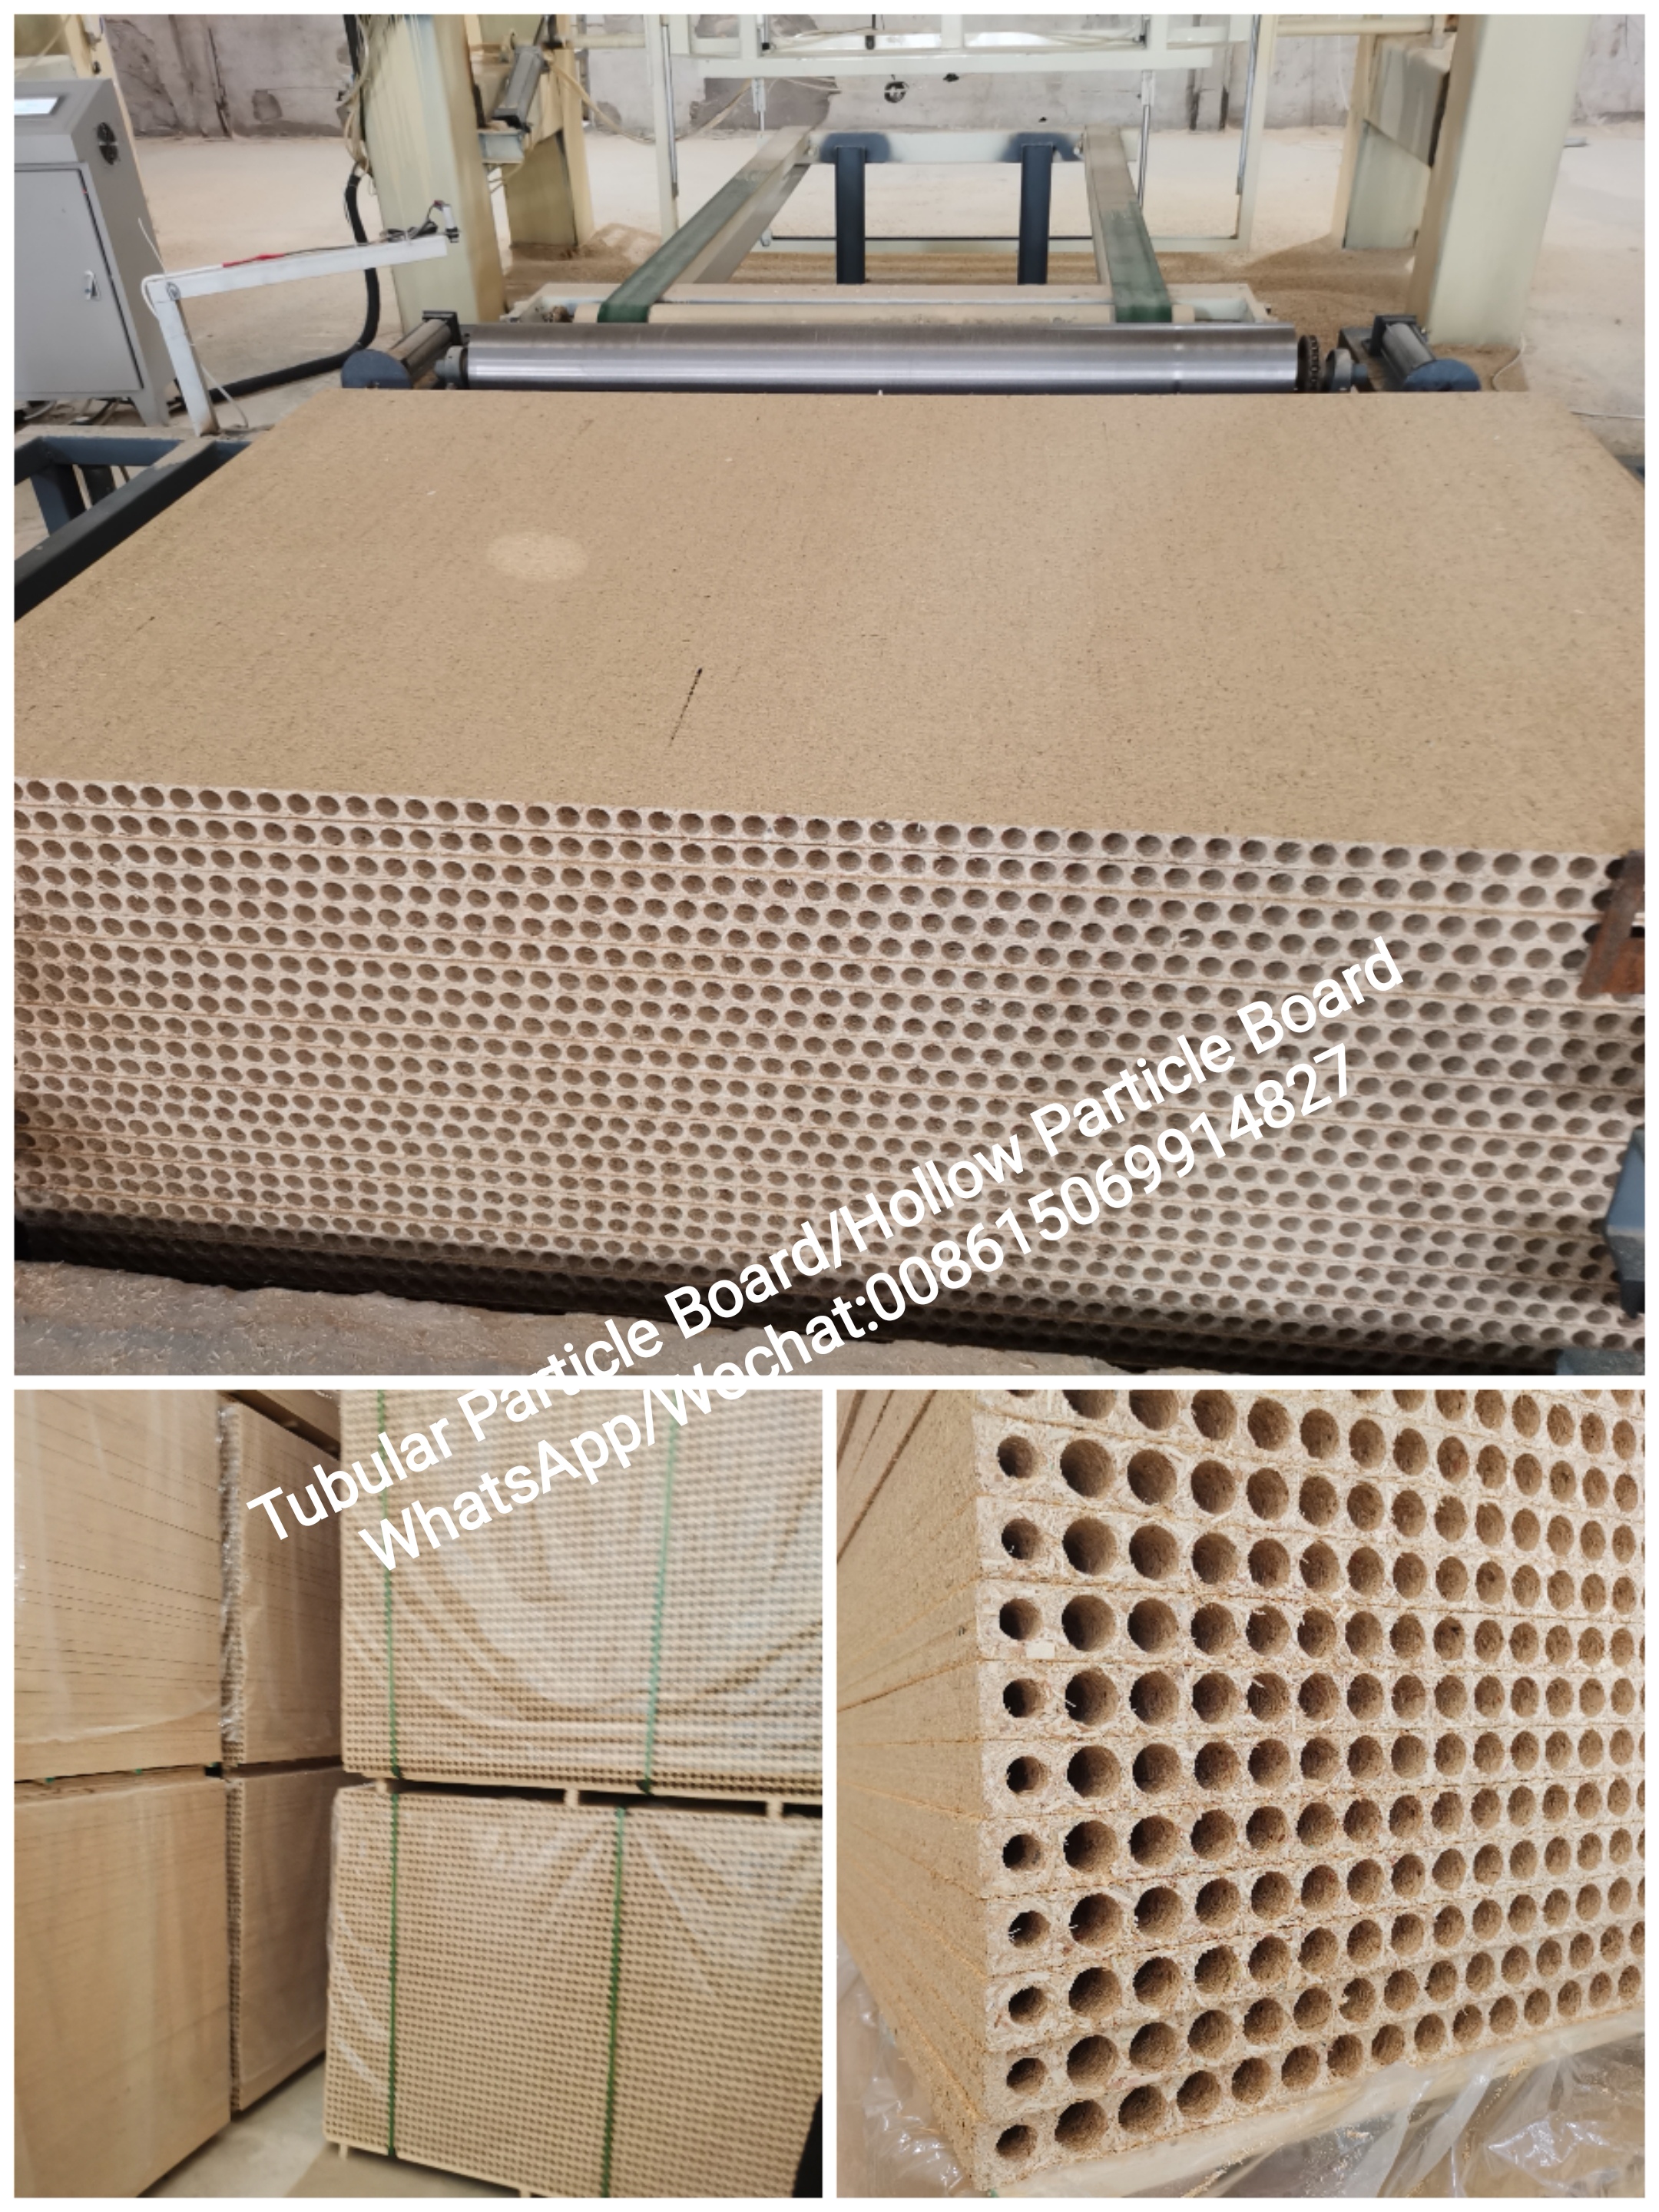 Particle Tubular Board/Particle Hollow board (图2)